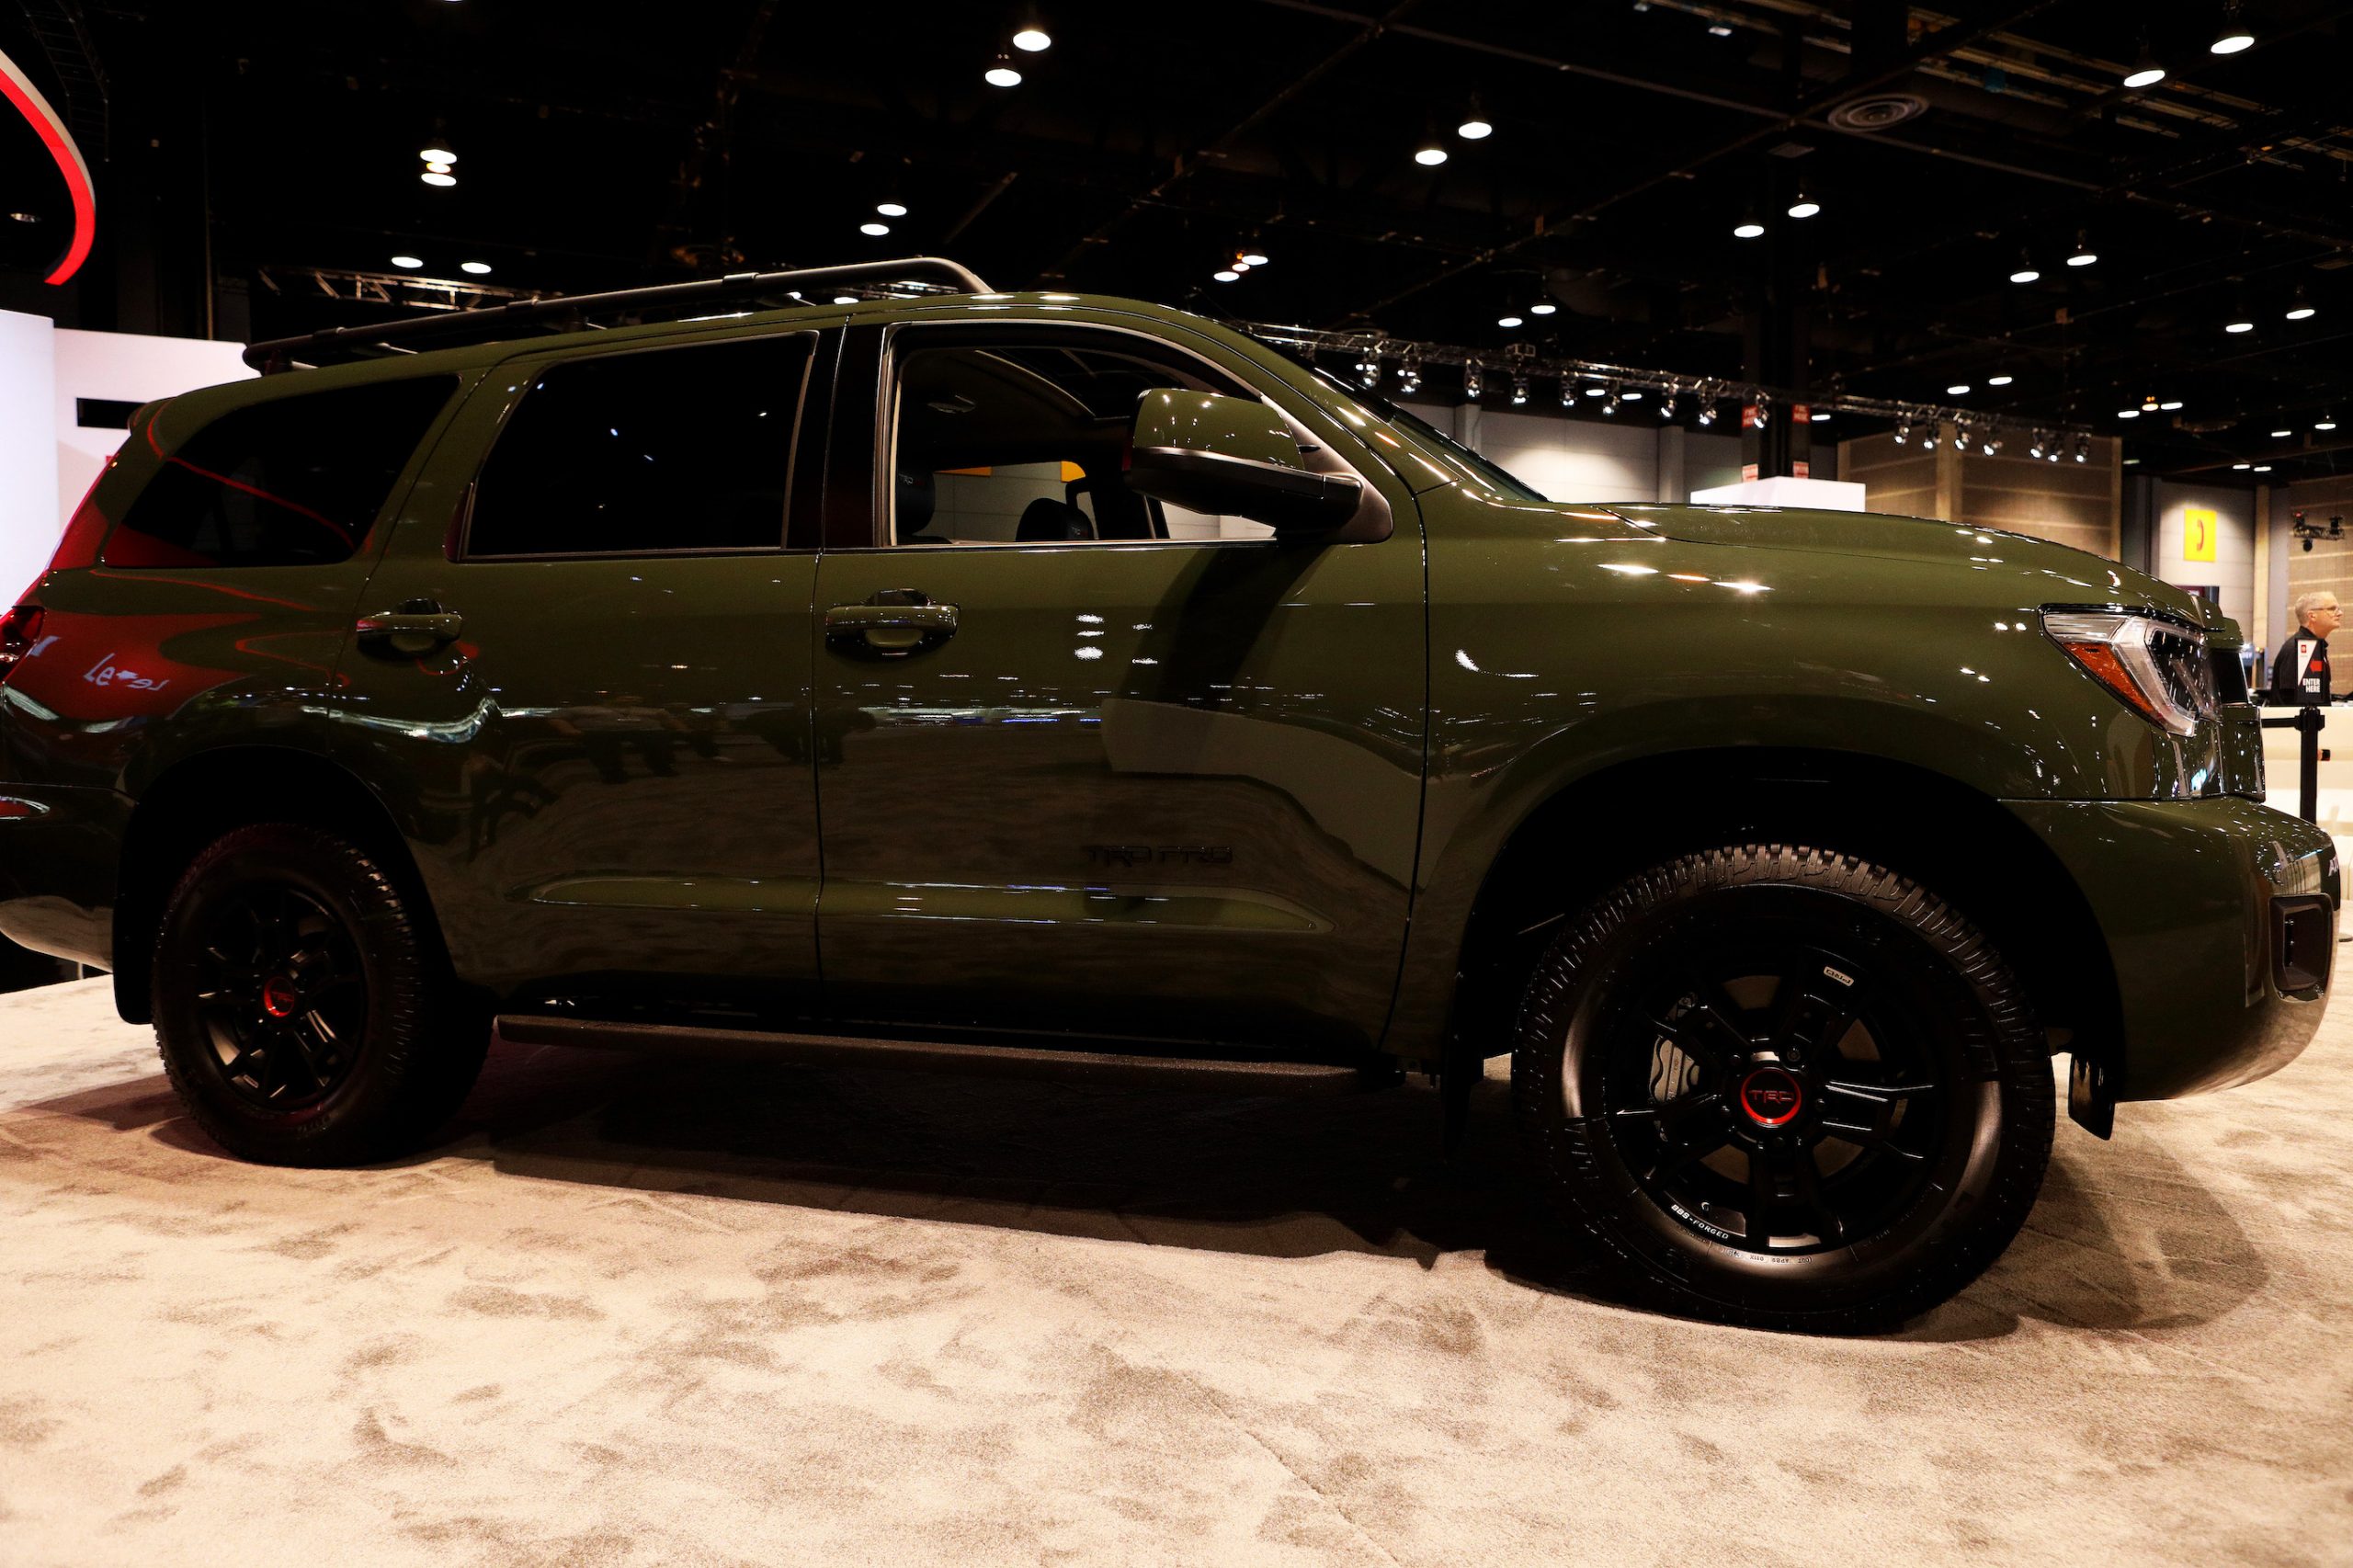 2020 Toyota Sequoia is on display at the 112th Annual Chicago Auto Show